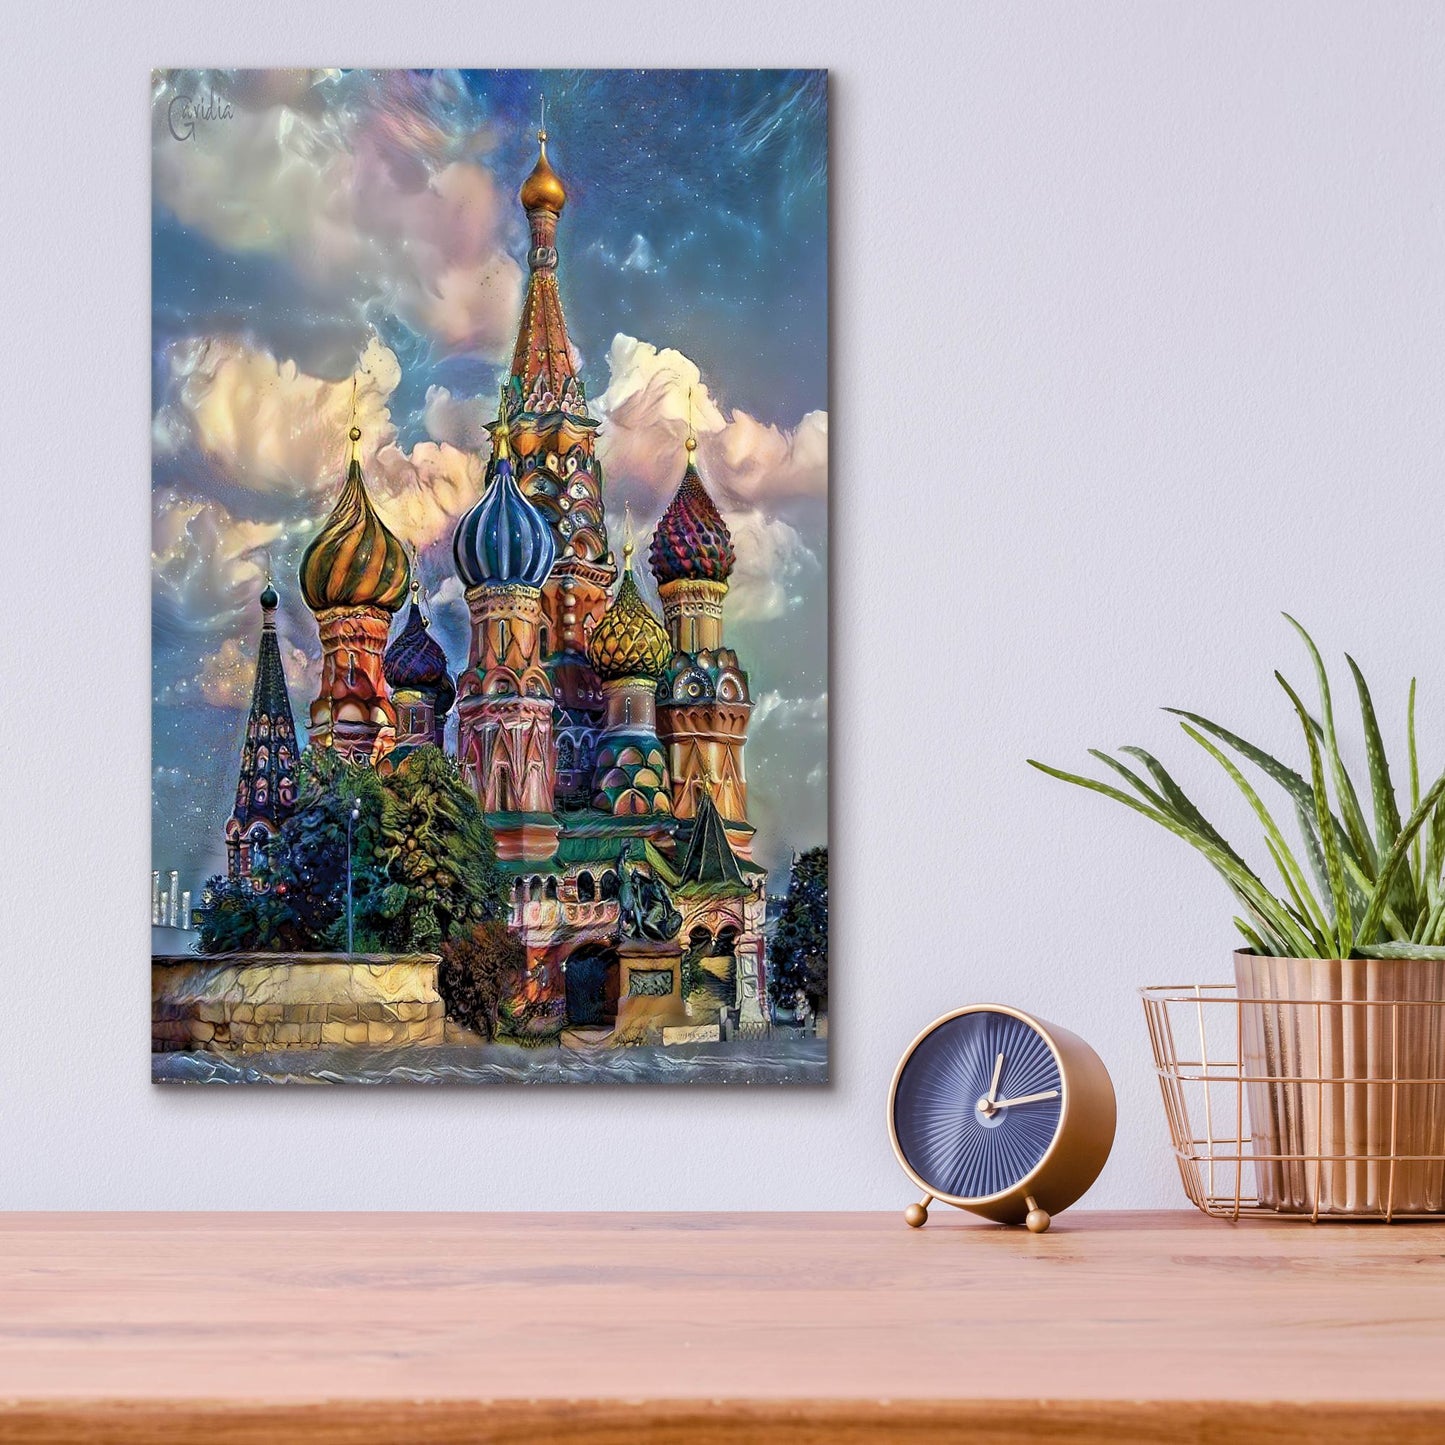 Epic Art 'Moscow Russia Cathedral Of Vasily The Blessed Saint Basil' by Pedro Gavidia, Acrylic Glass Wall Art,12x16